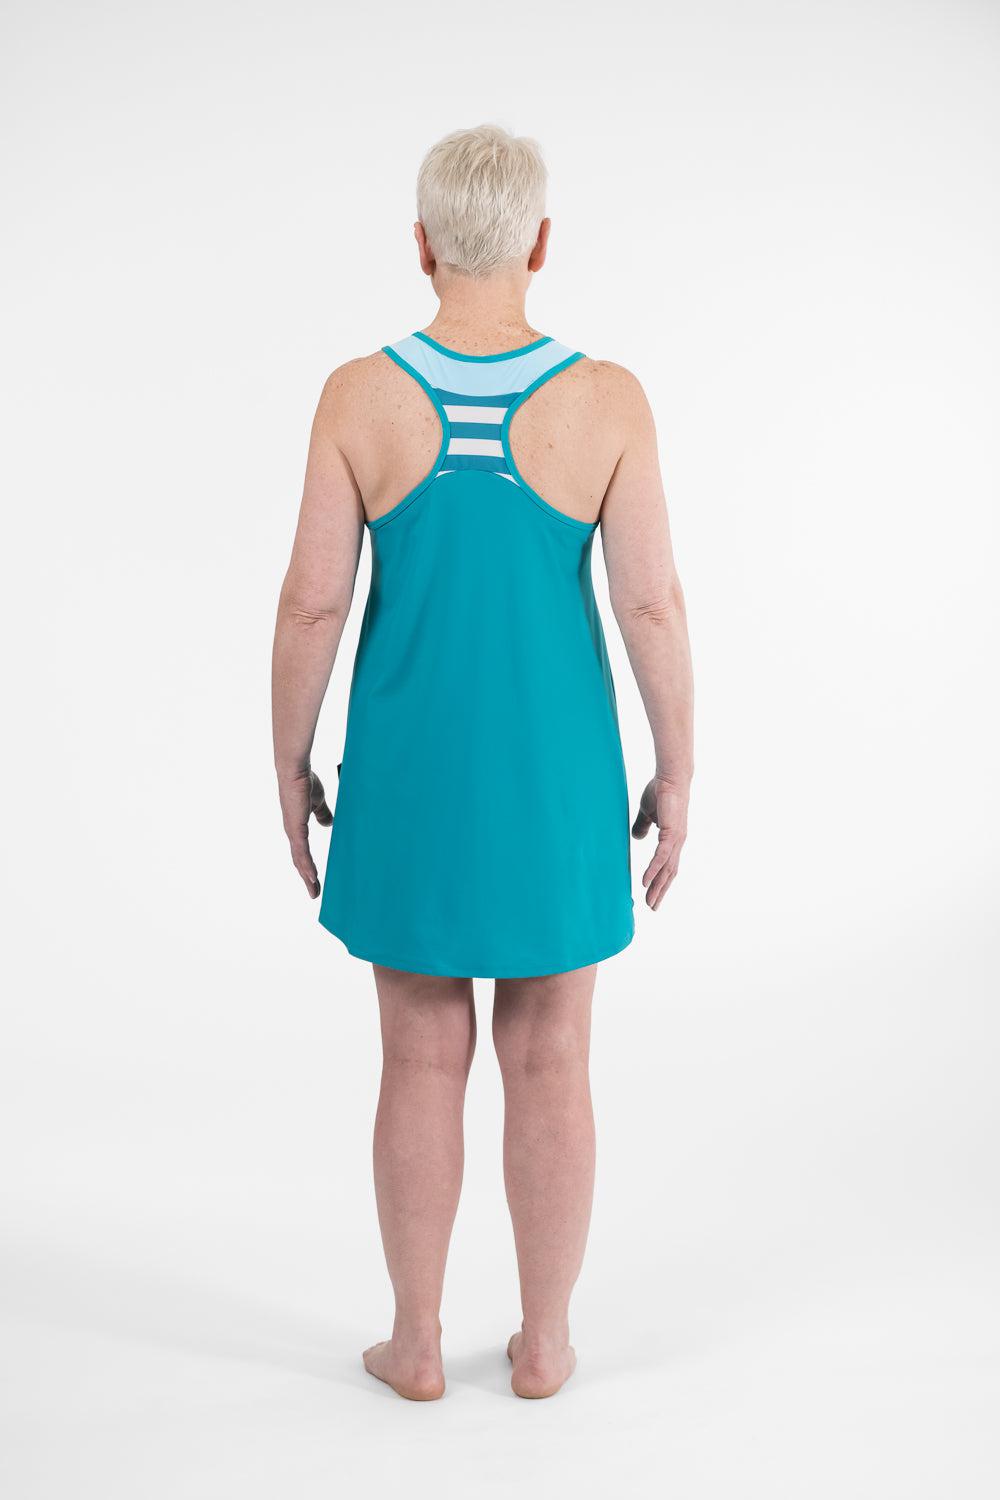 Racer Back Rashie Dress teal and white with blue – www.